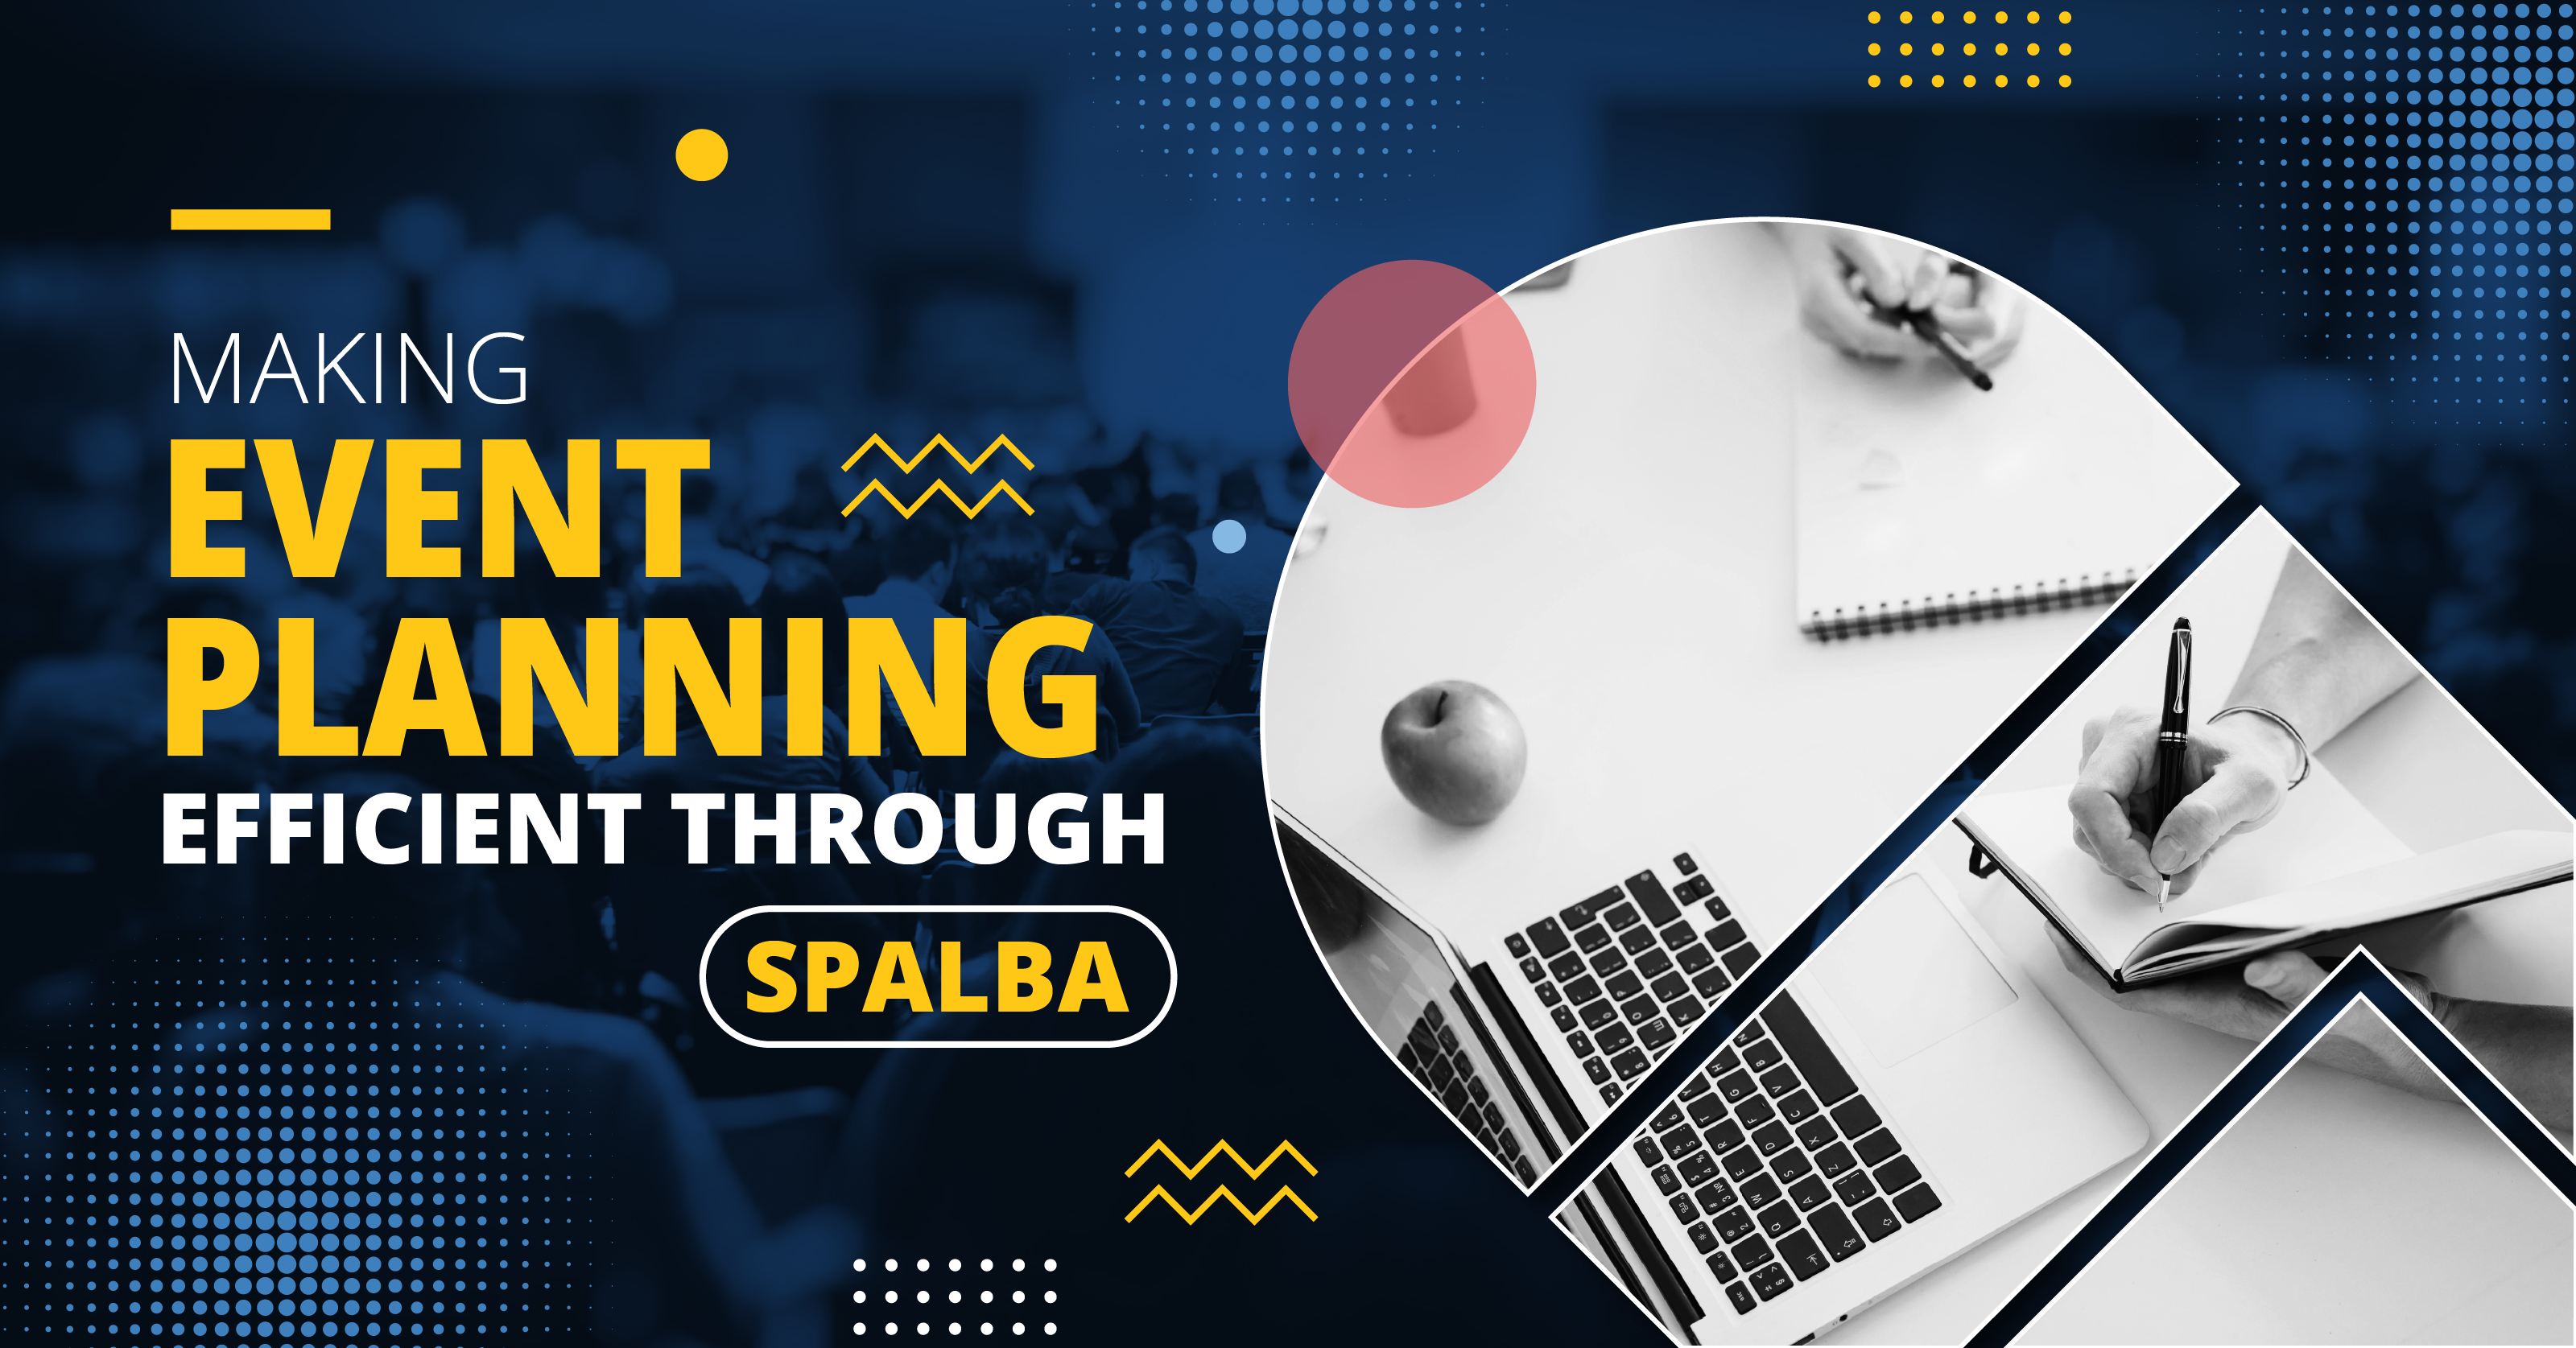 Spalba - The first-ever platform to SaaSify event planning